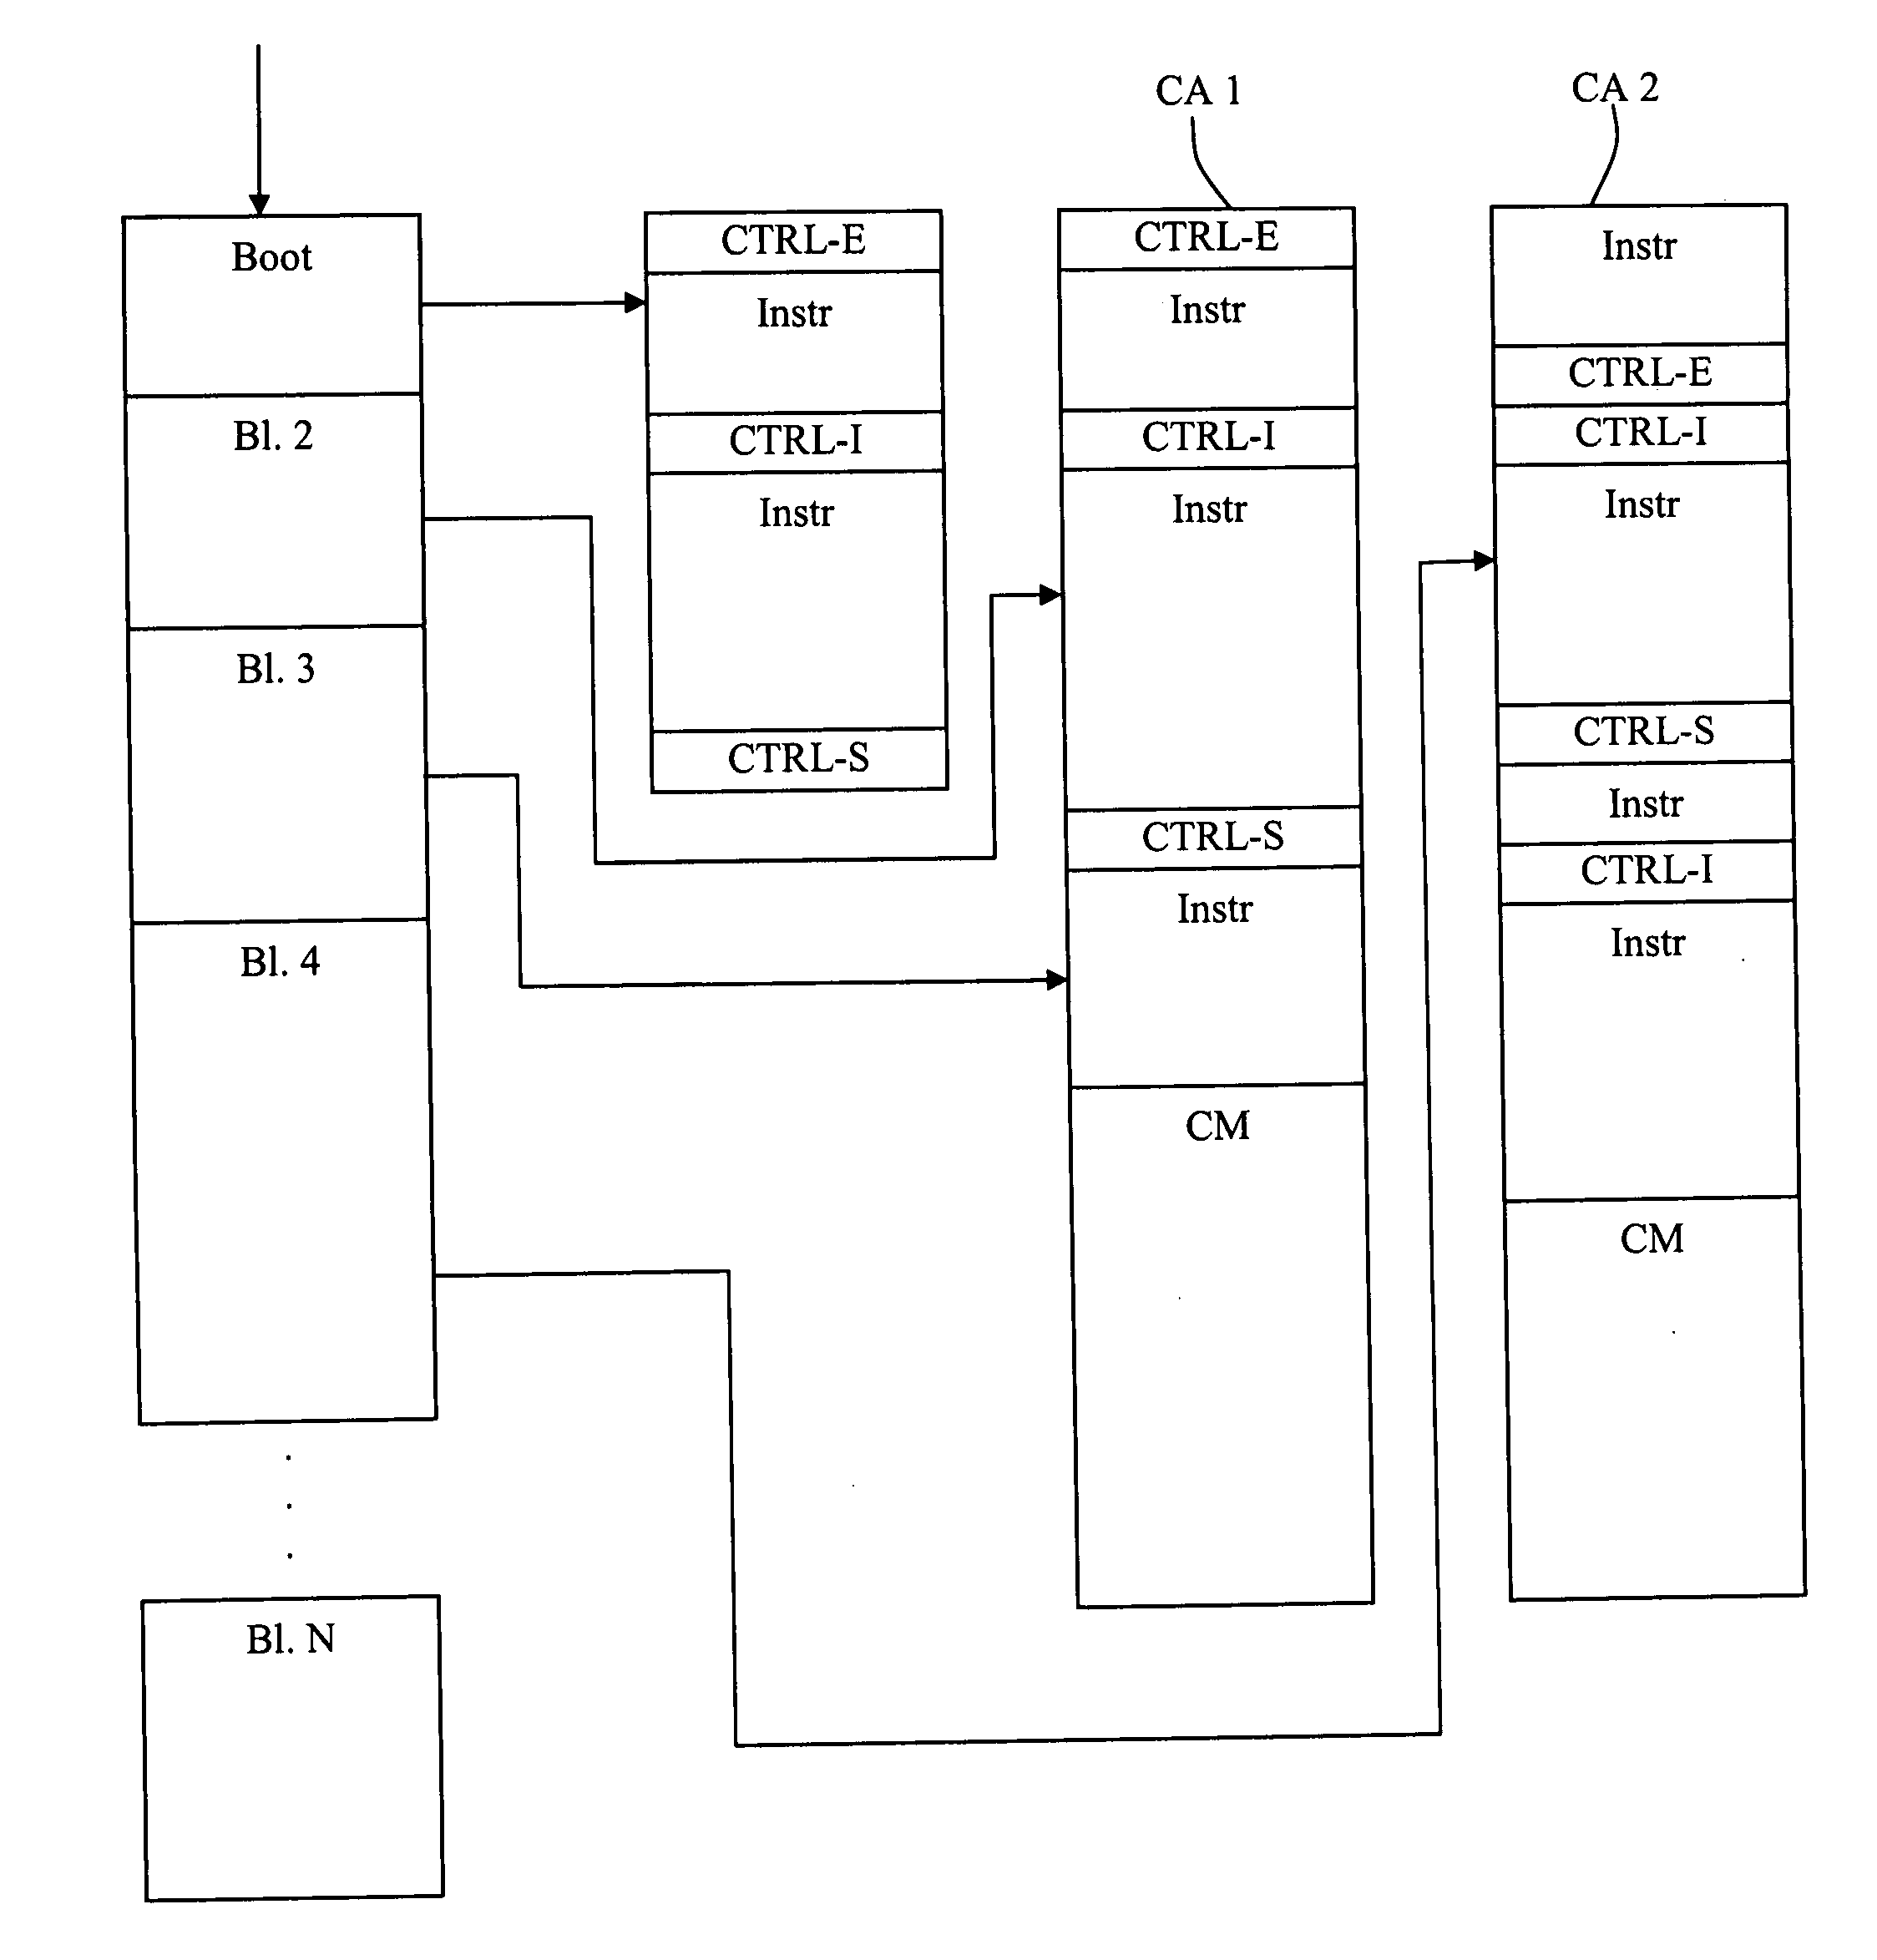 Method to control the execution of a program by a microcontroller